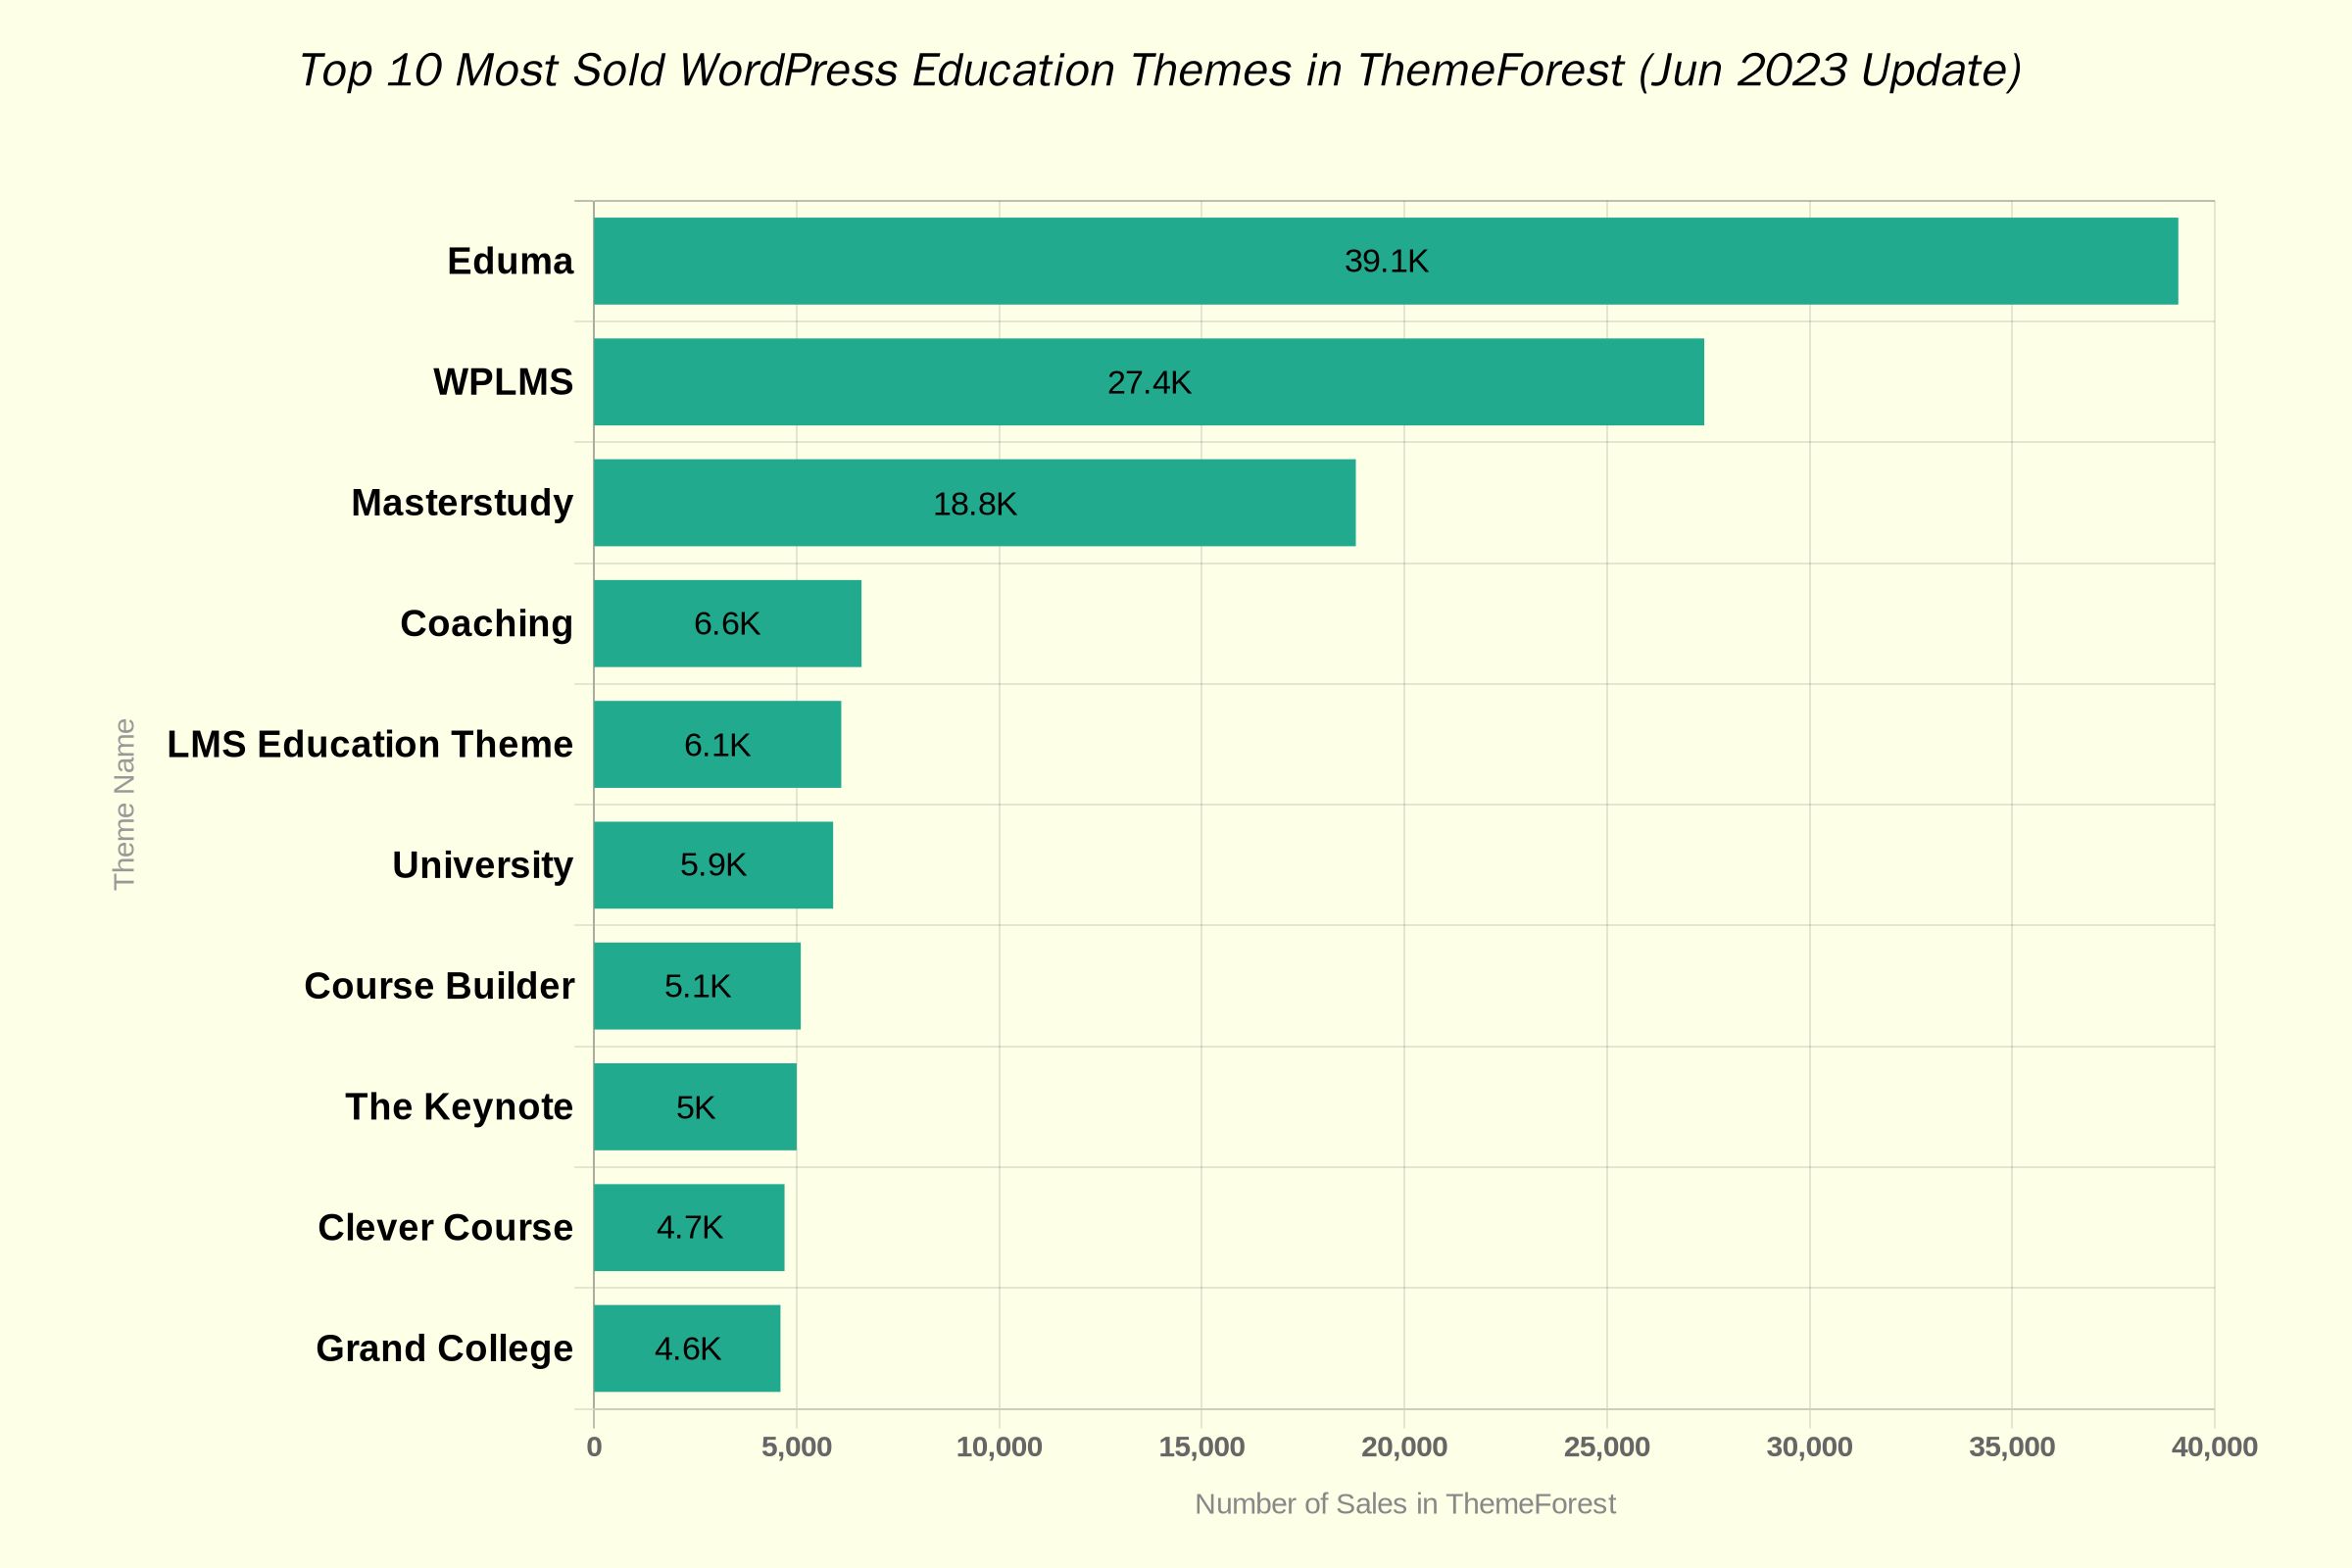 Top 10 most-sold education themes on ThemeForest until June 2023